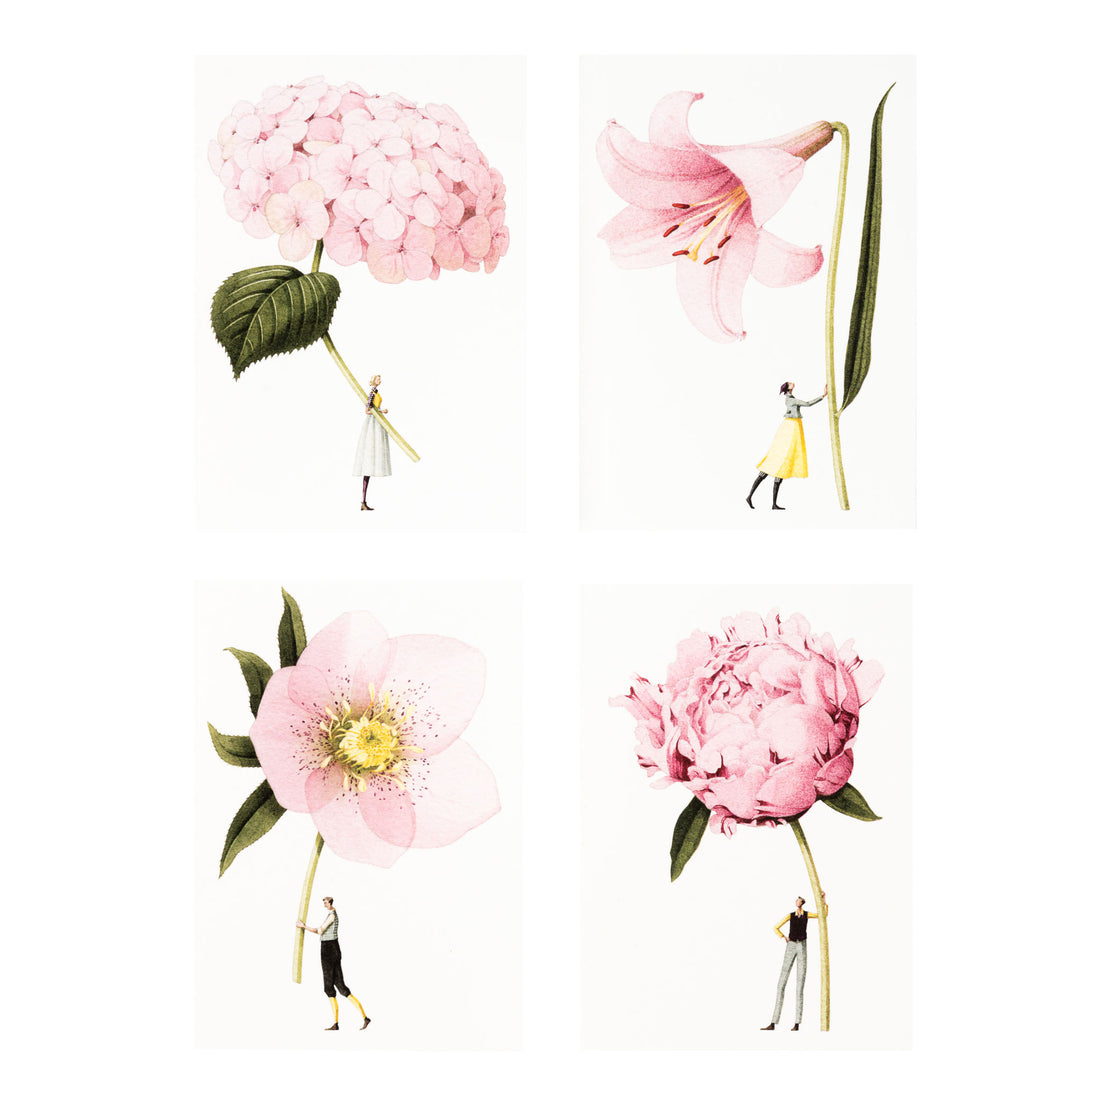 Four In Bloom Pink Flowers Notecards, Set of 8 by Hester &amp; Cook featuring pink floral prints with a woman holding a flower.